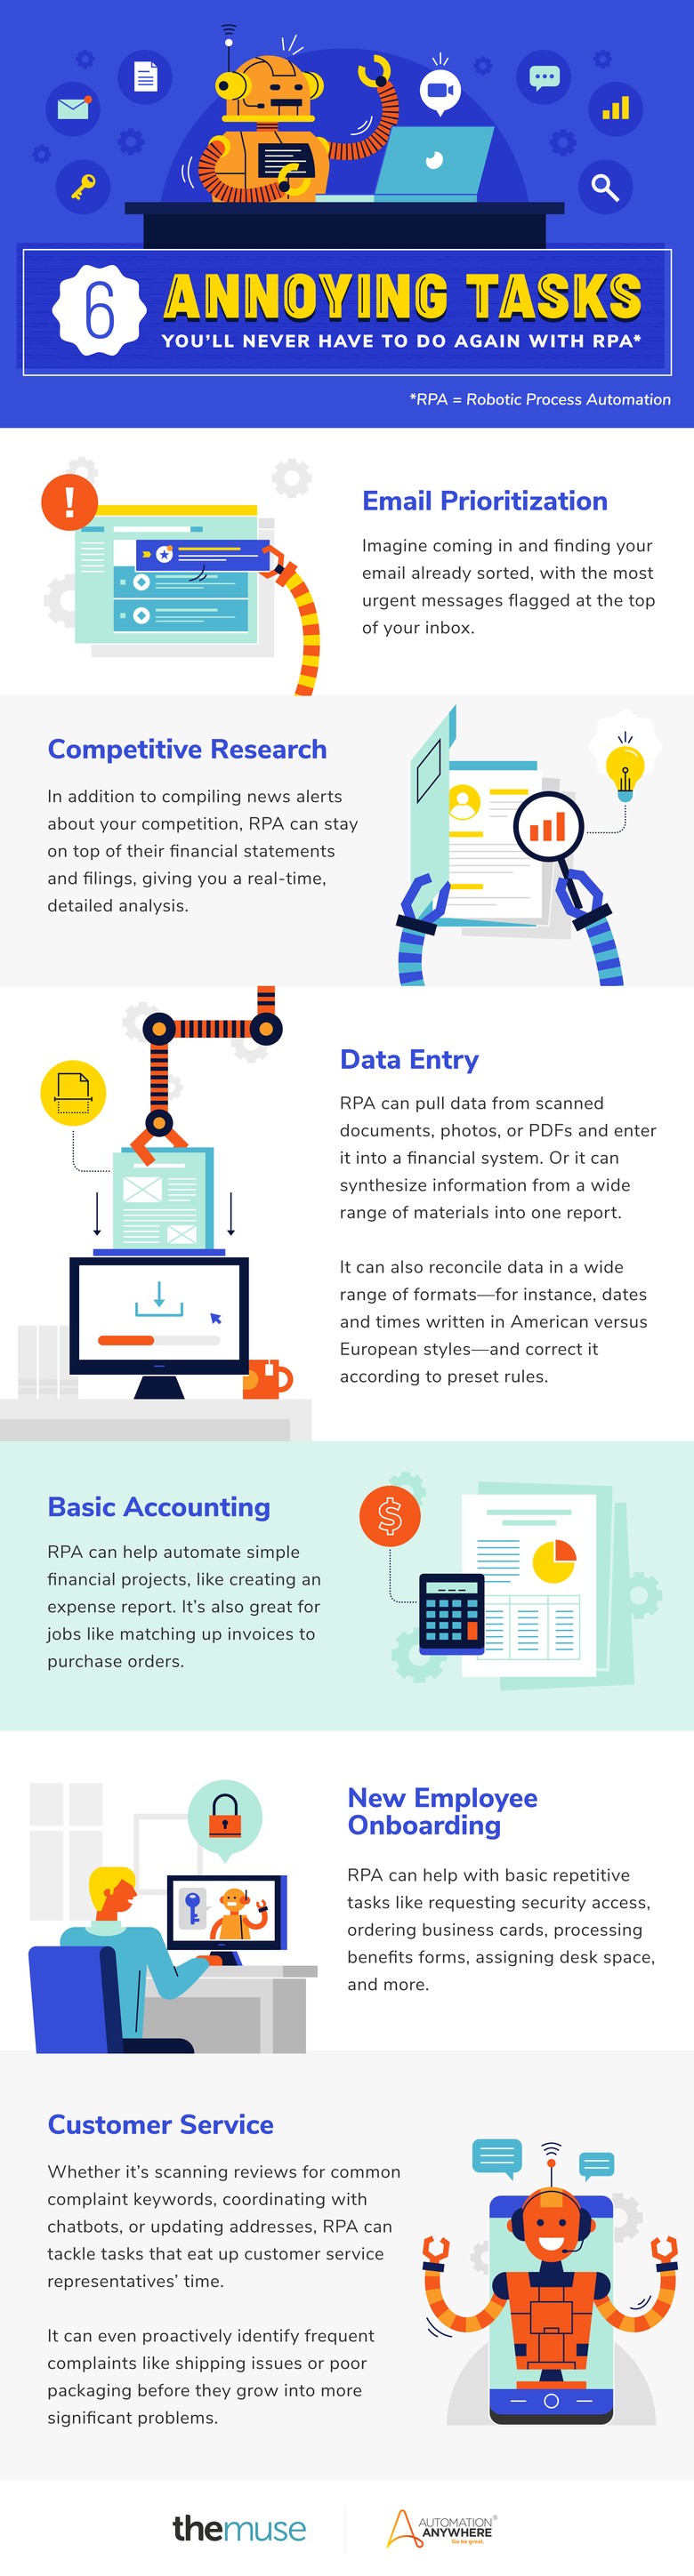 infographic illustrating annoying tasks robotic process automation can perform; complete text below the infographic